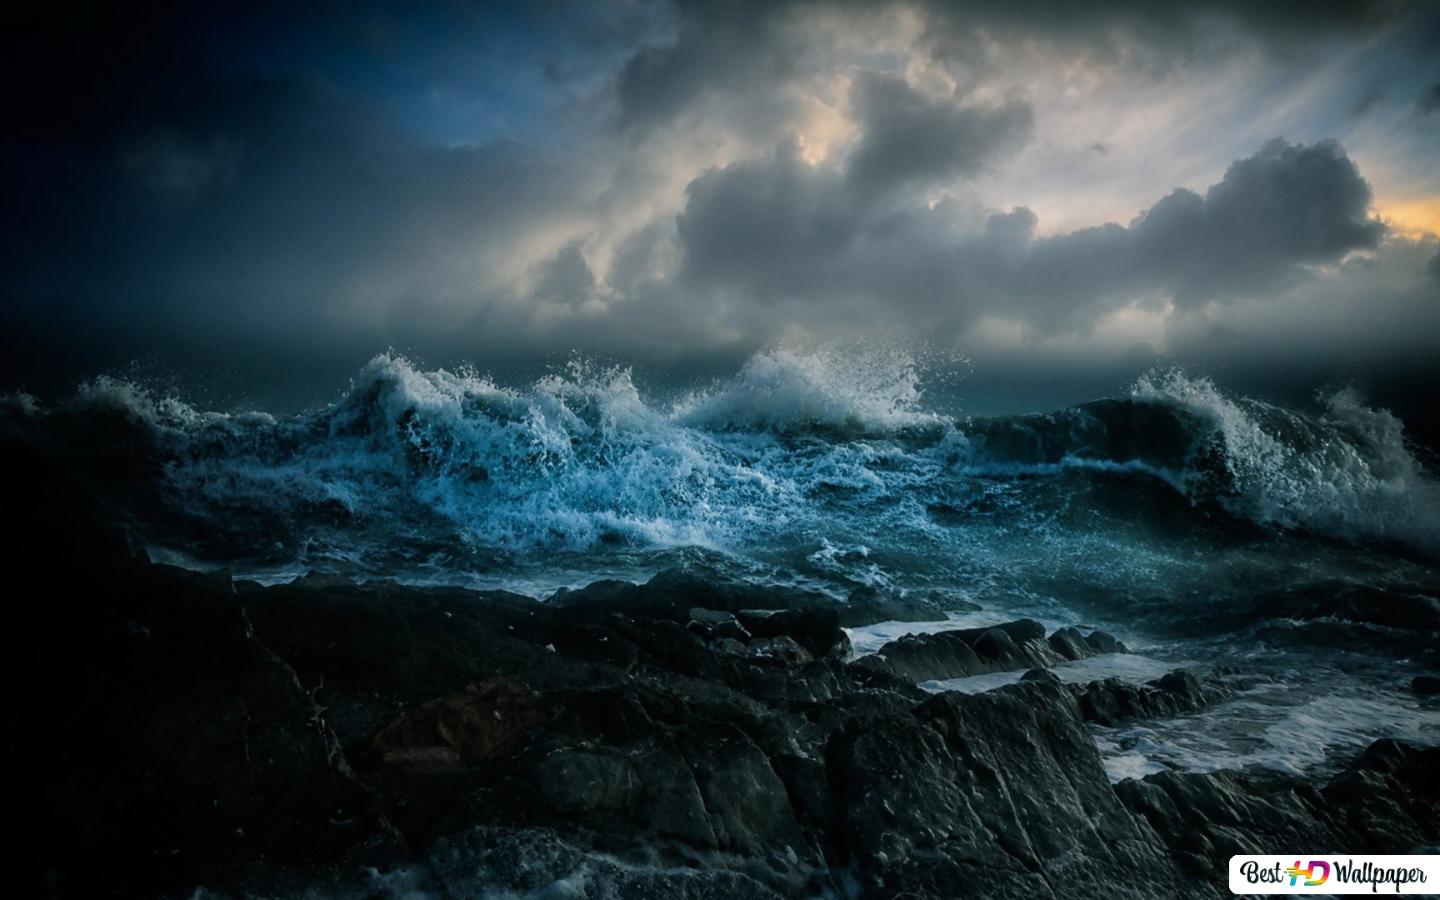 Storm next to the rocky shore in the sea HD wallpaper download